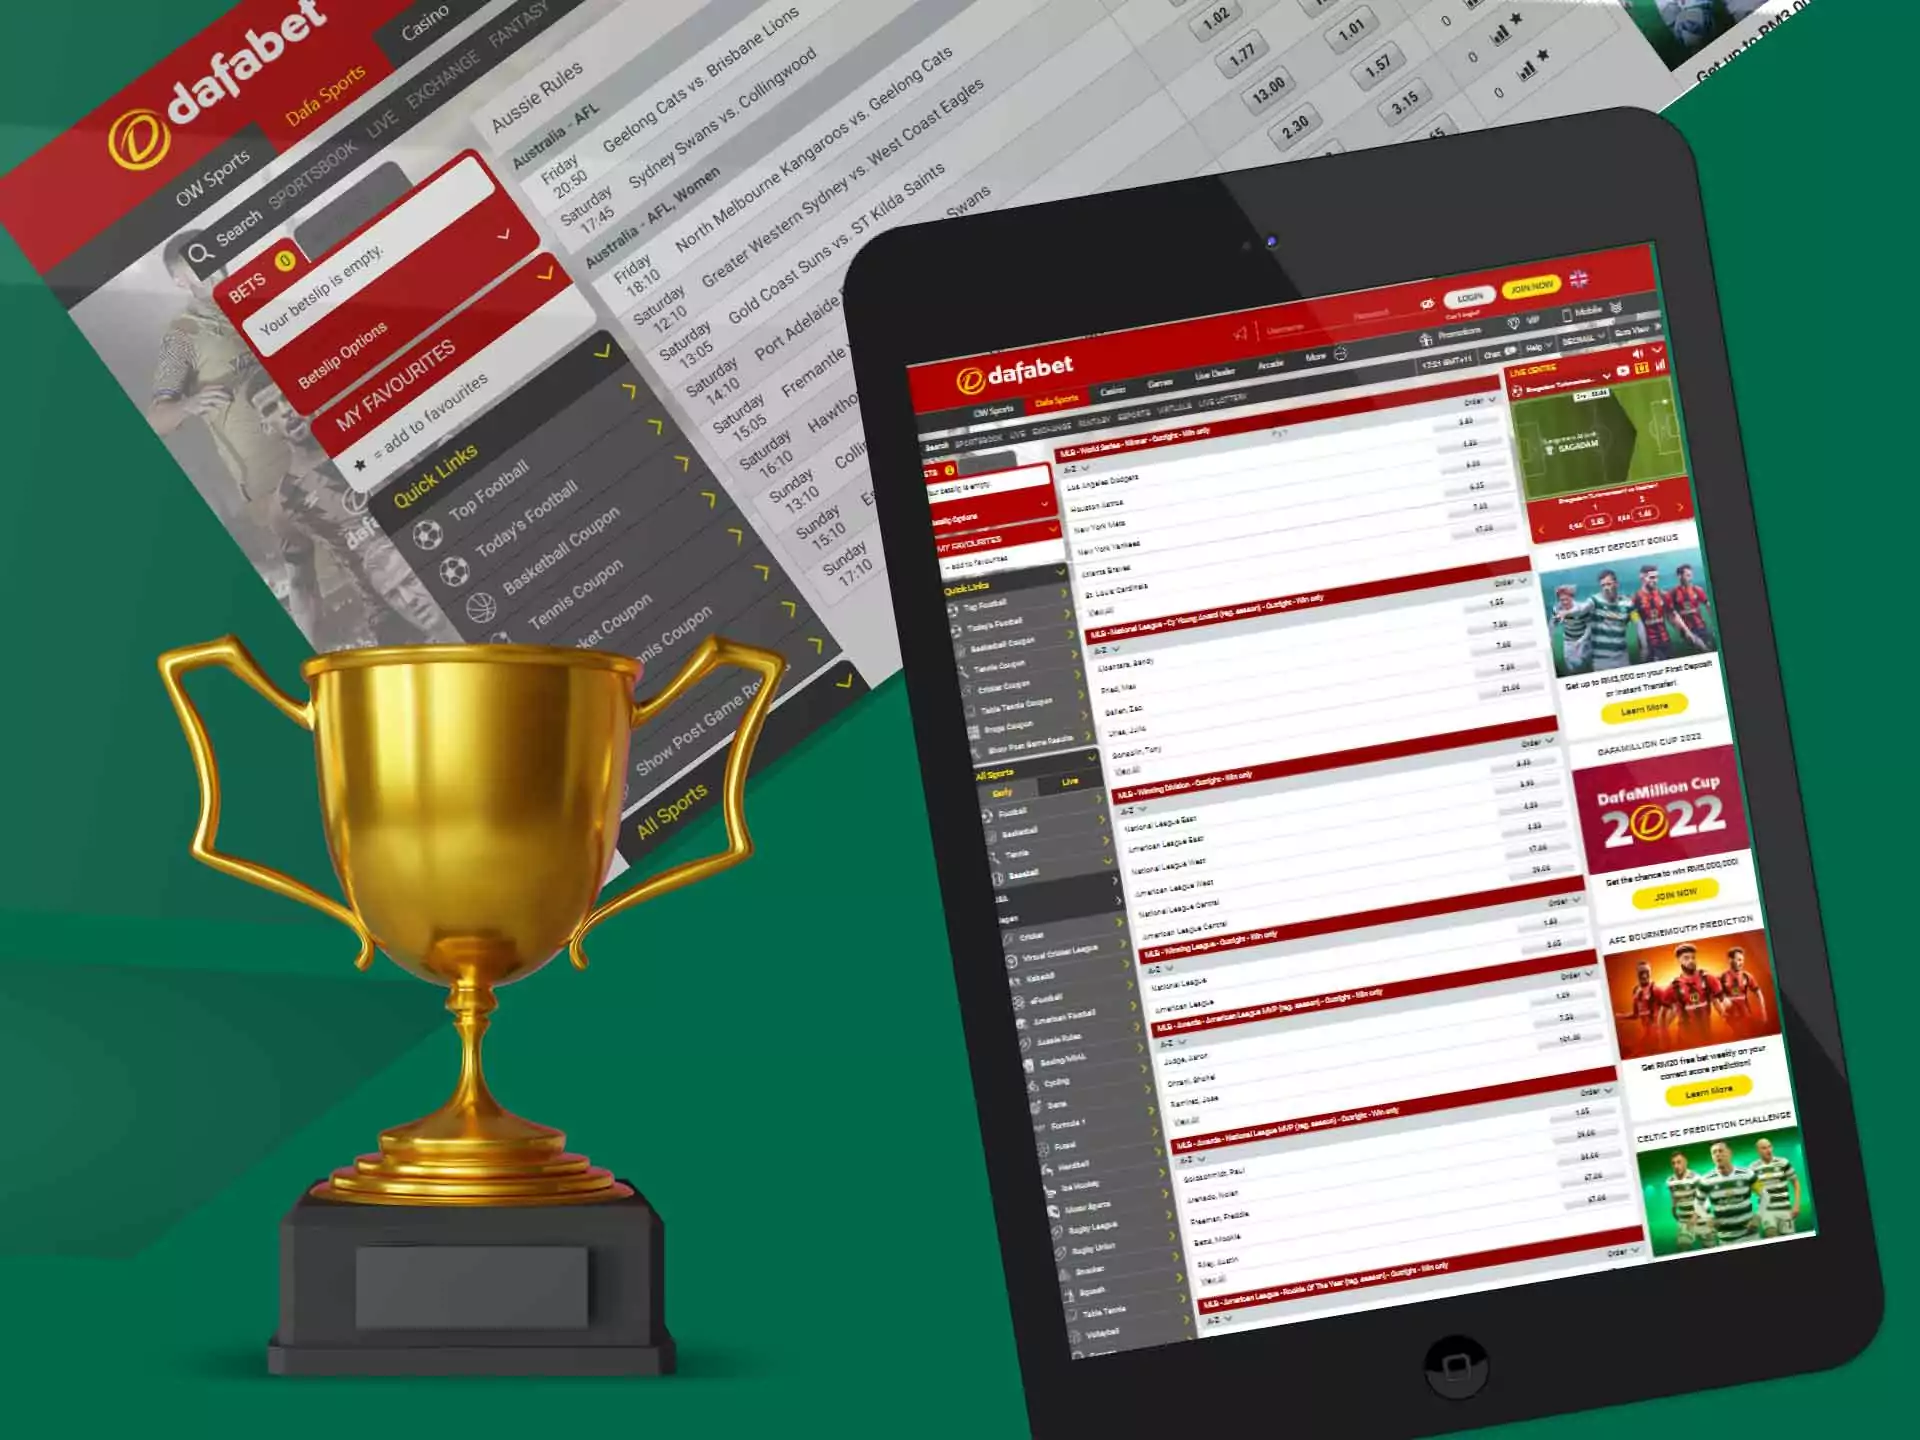 Handicap bets are also available at Dafabet.